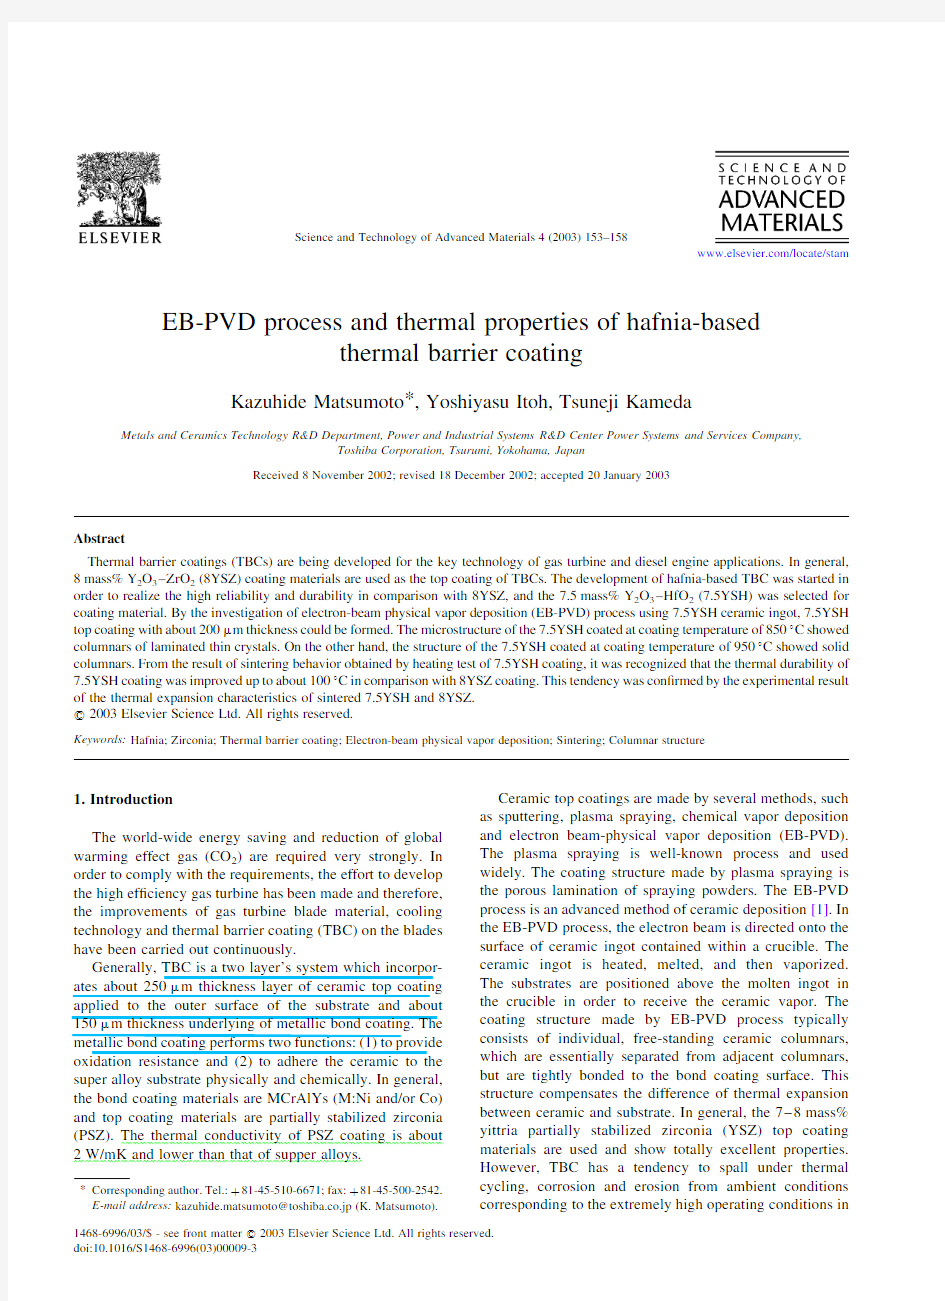 4. EB-PVD process and thermal properties of hafnia-based thermal barrier coating